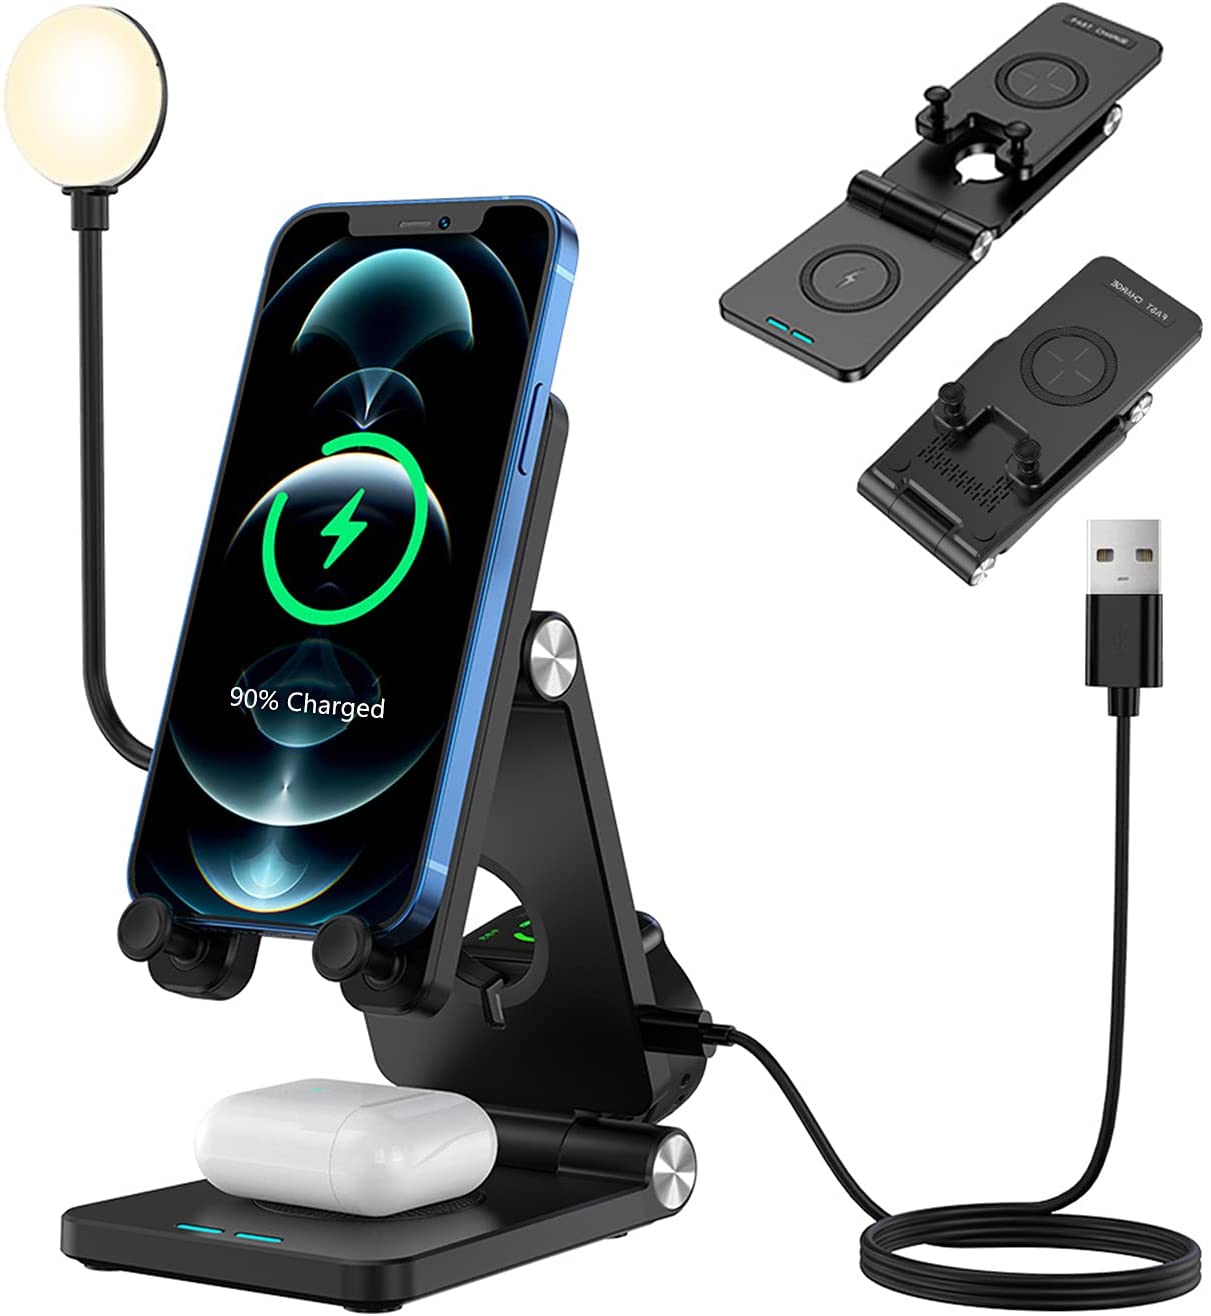 DS BS 4 in 1 Wireless Charging Station  with LED Desk Lamp